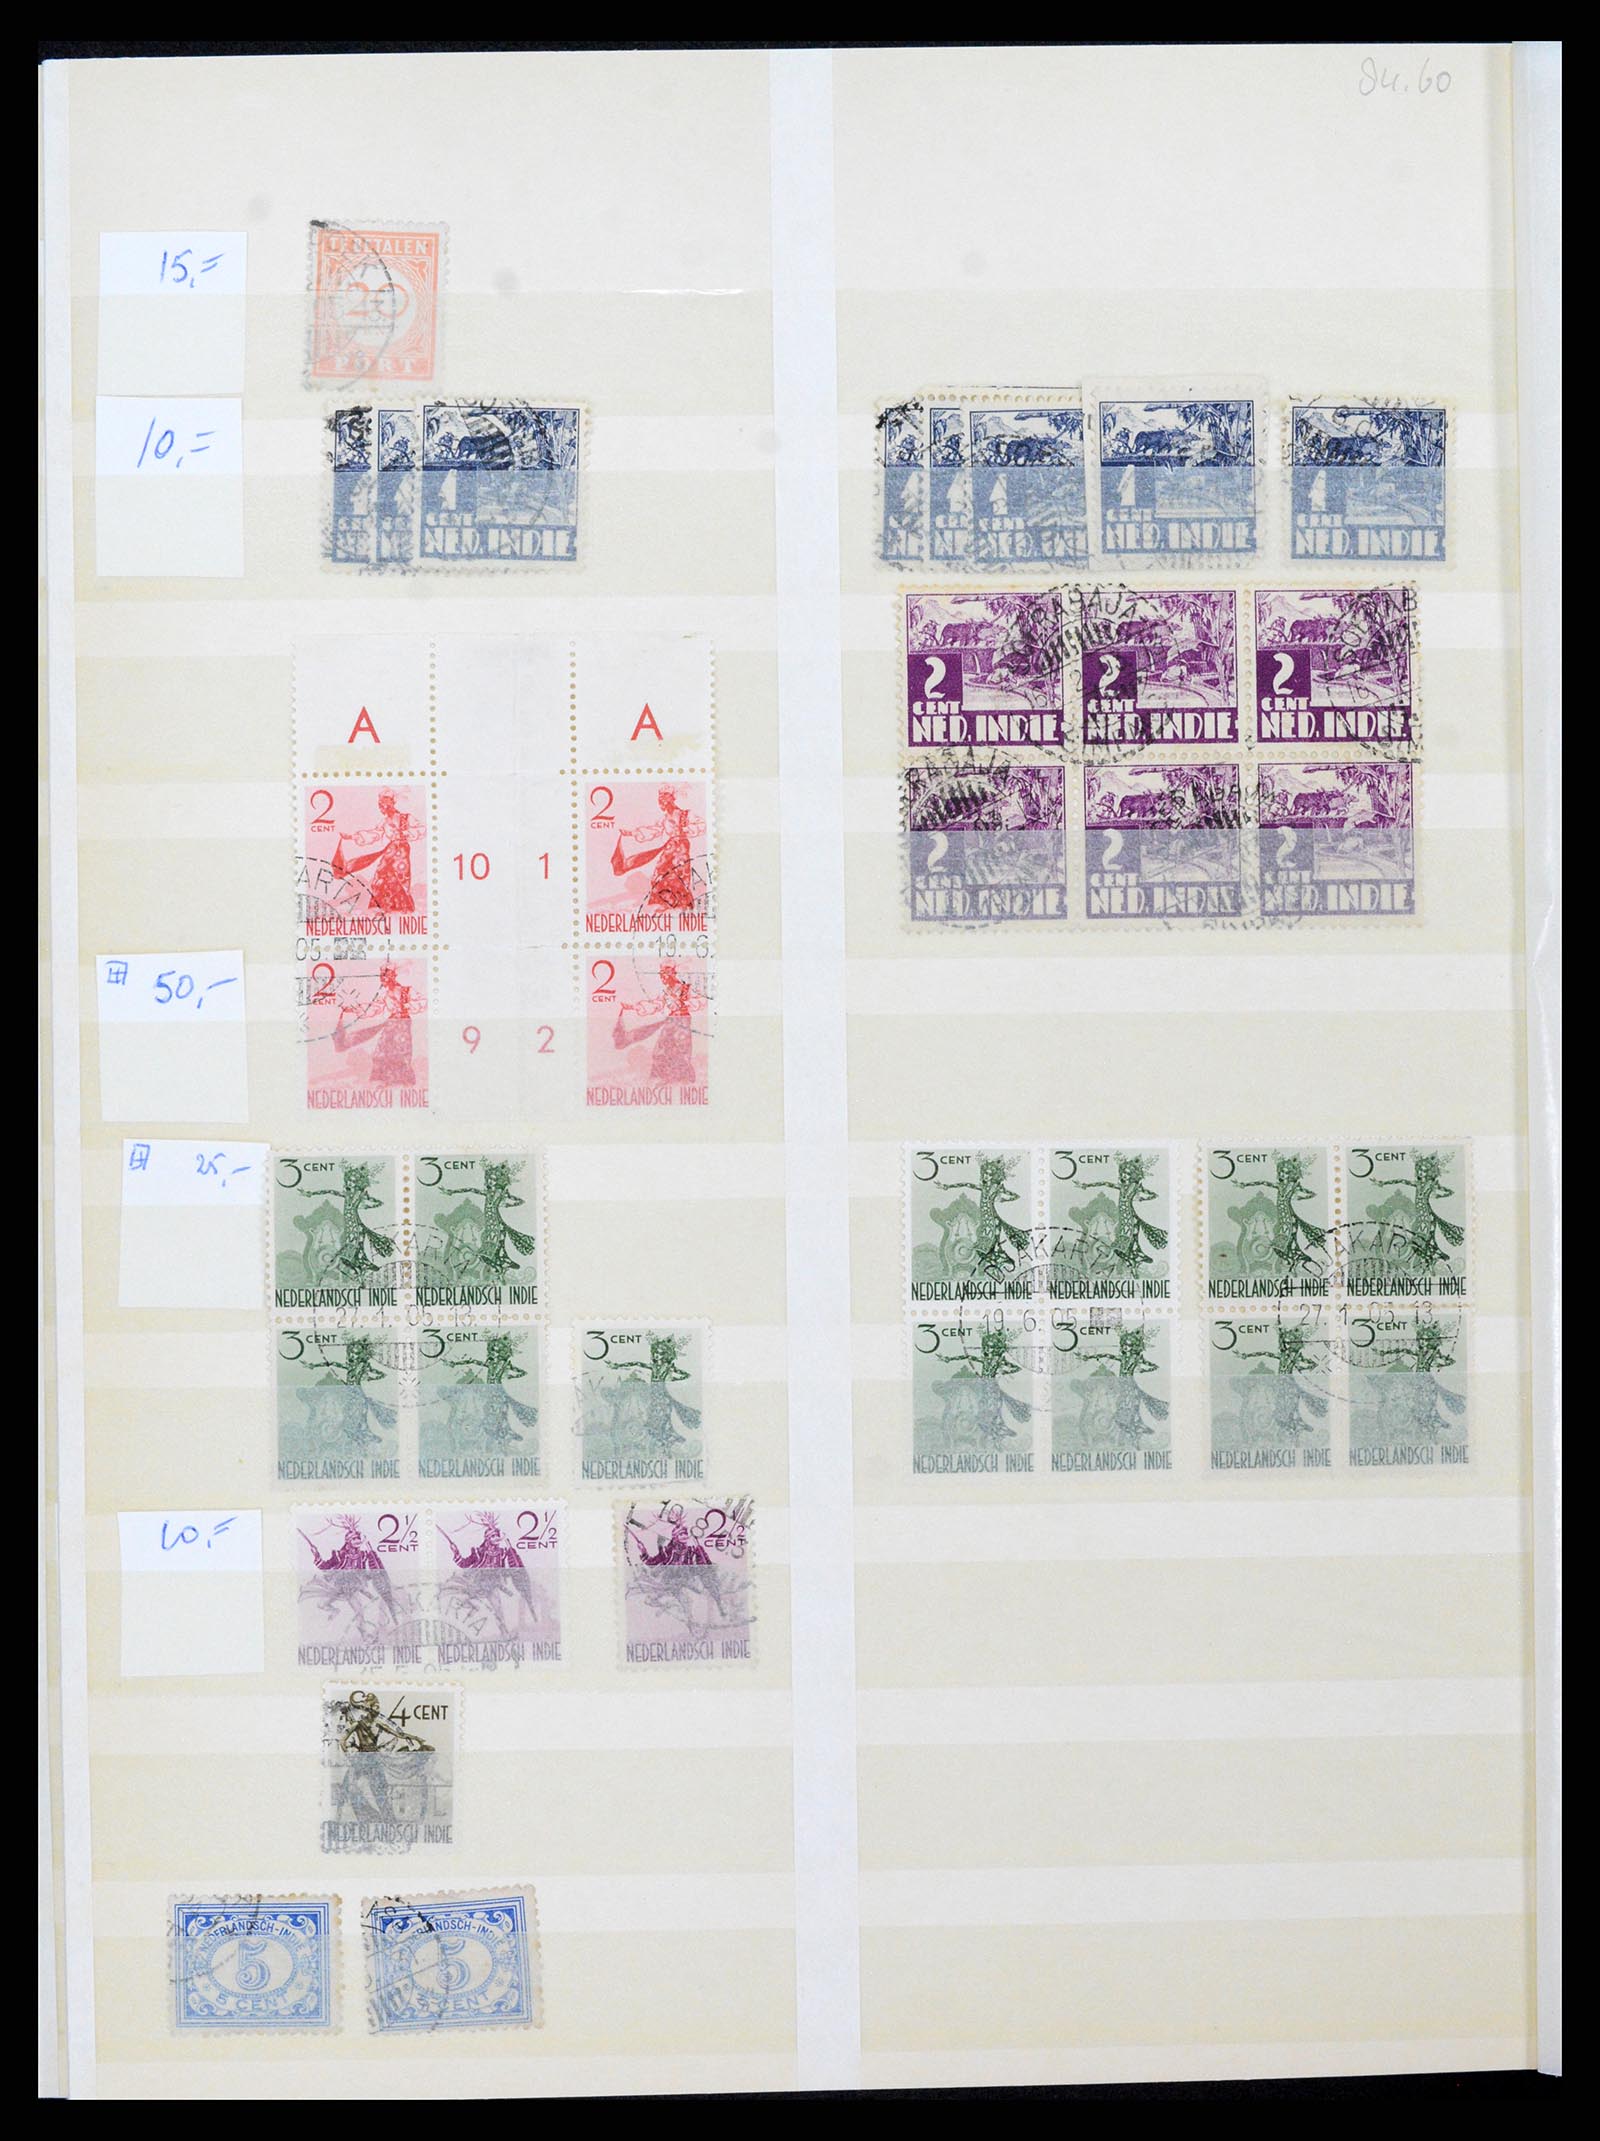 37429 032 - Stamp collection 37429 Japanese occupation Dutch East Indies 1942-1945.